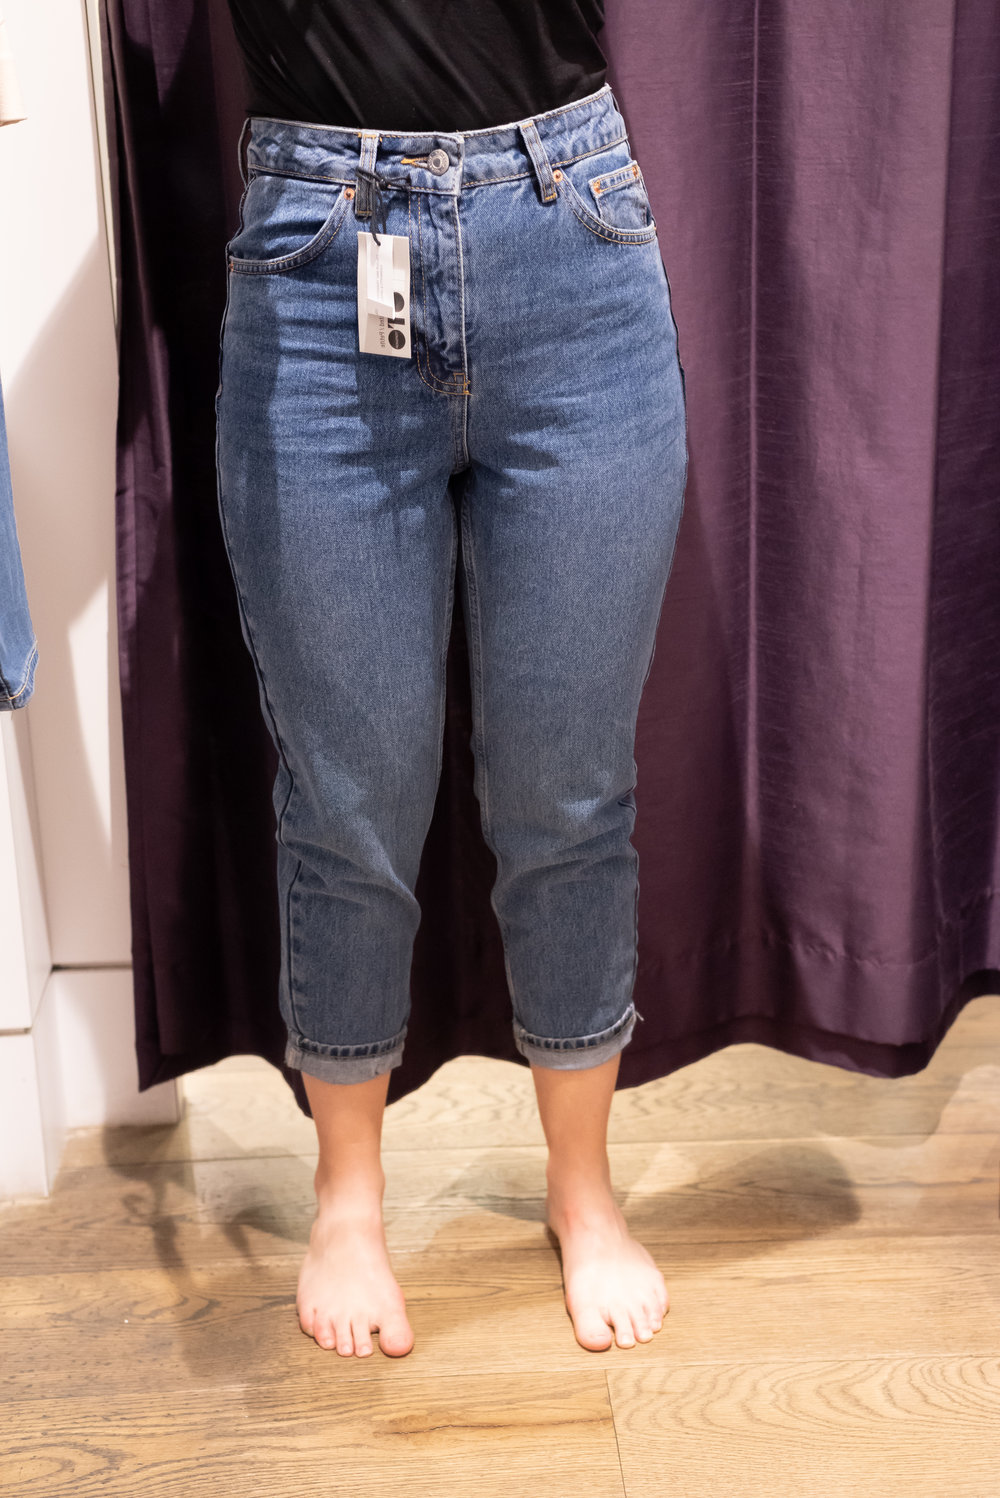 BEST WORST TOPSHOP JEANS FOR PETITES — The Petite Pear